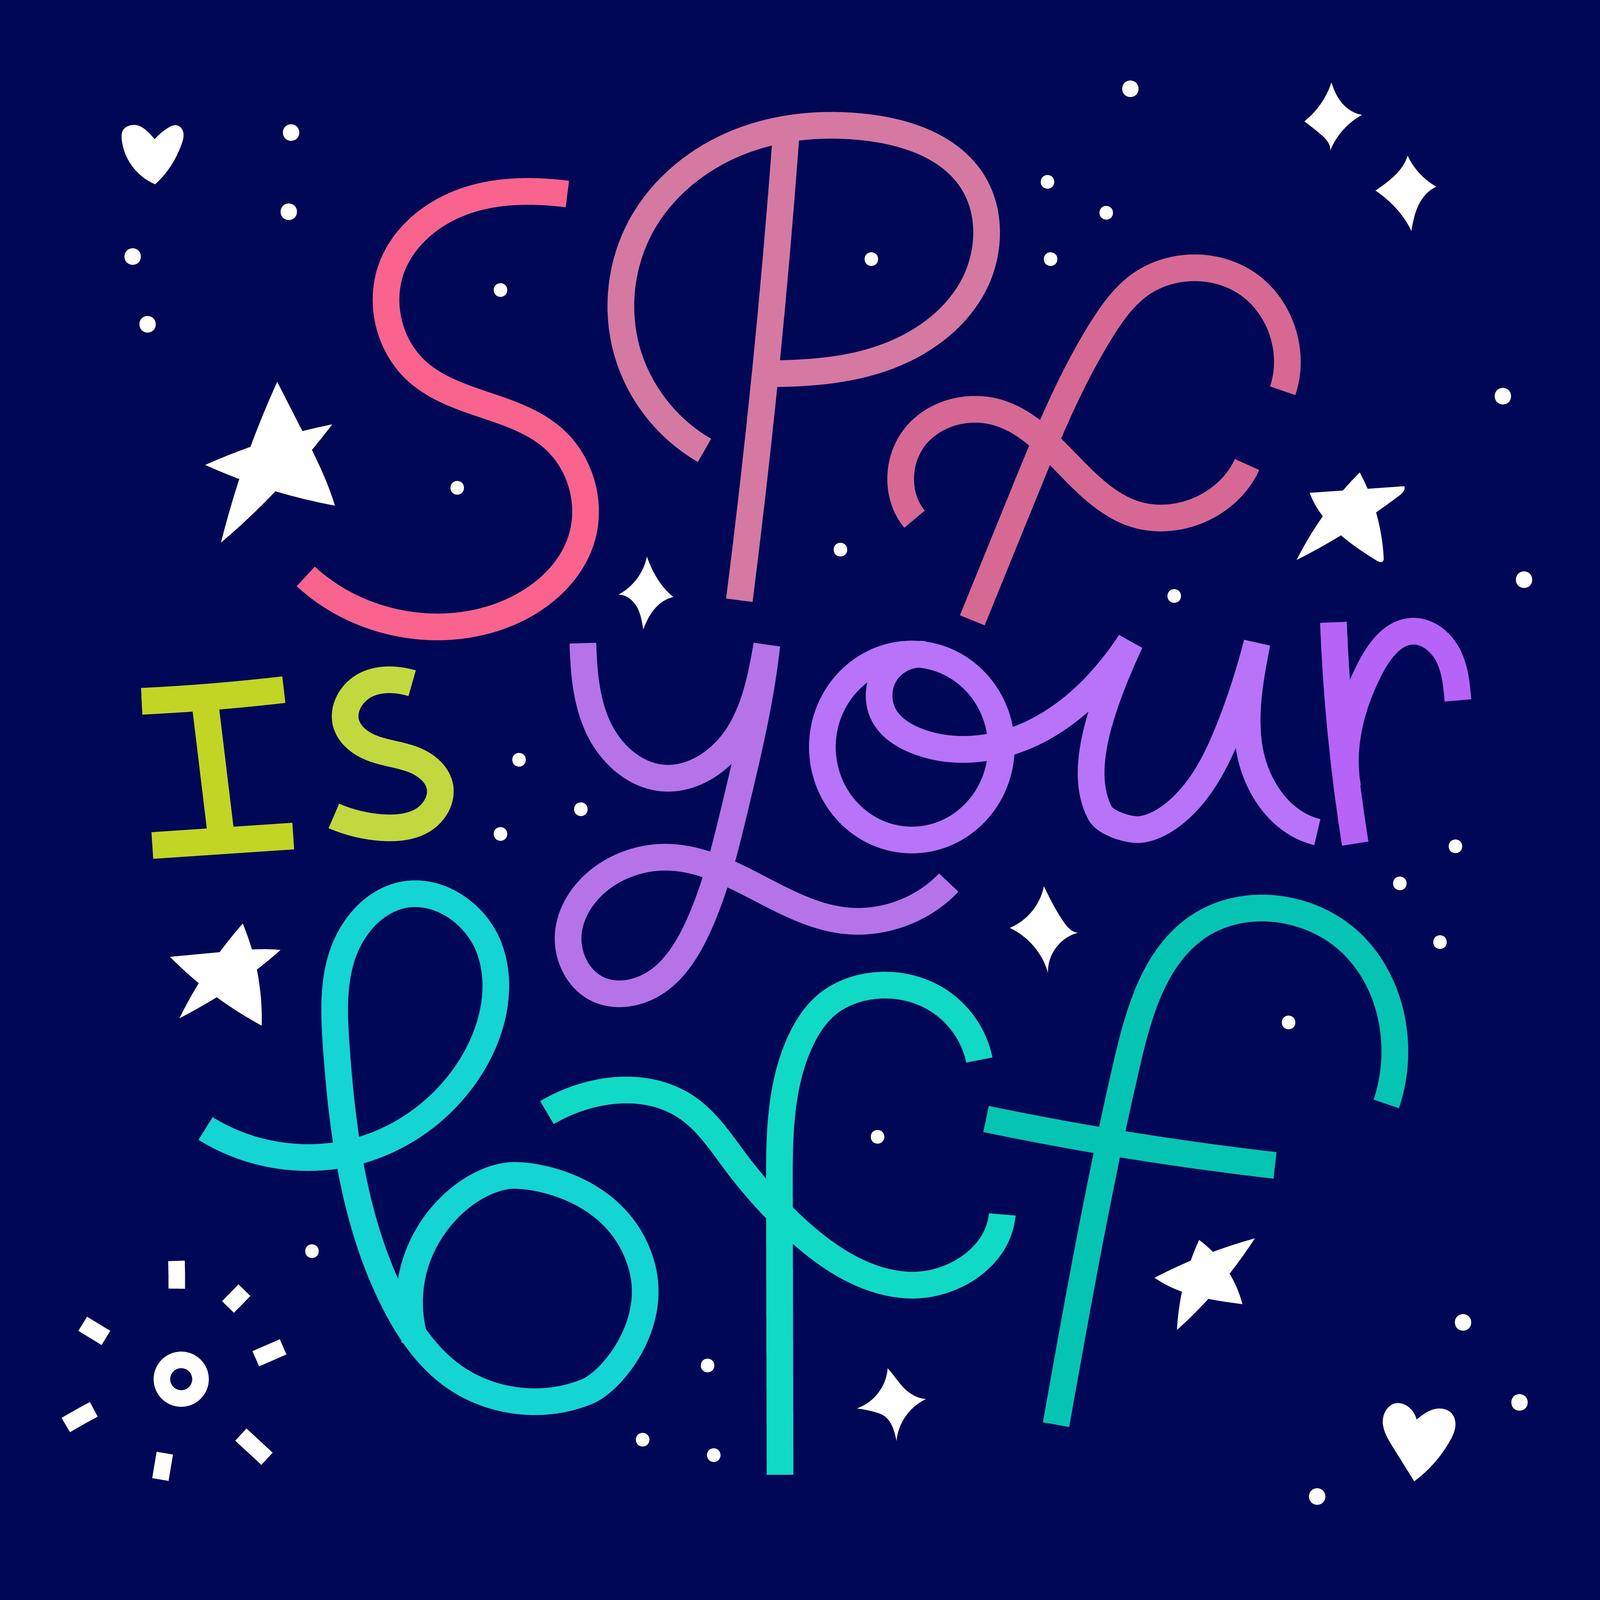 Beauty and skincare quote. SPF is your BFF by chickfishdoodles